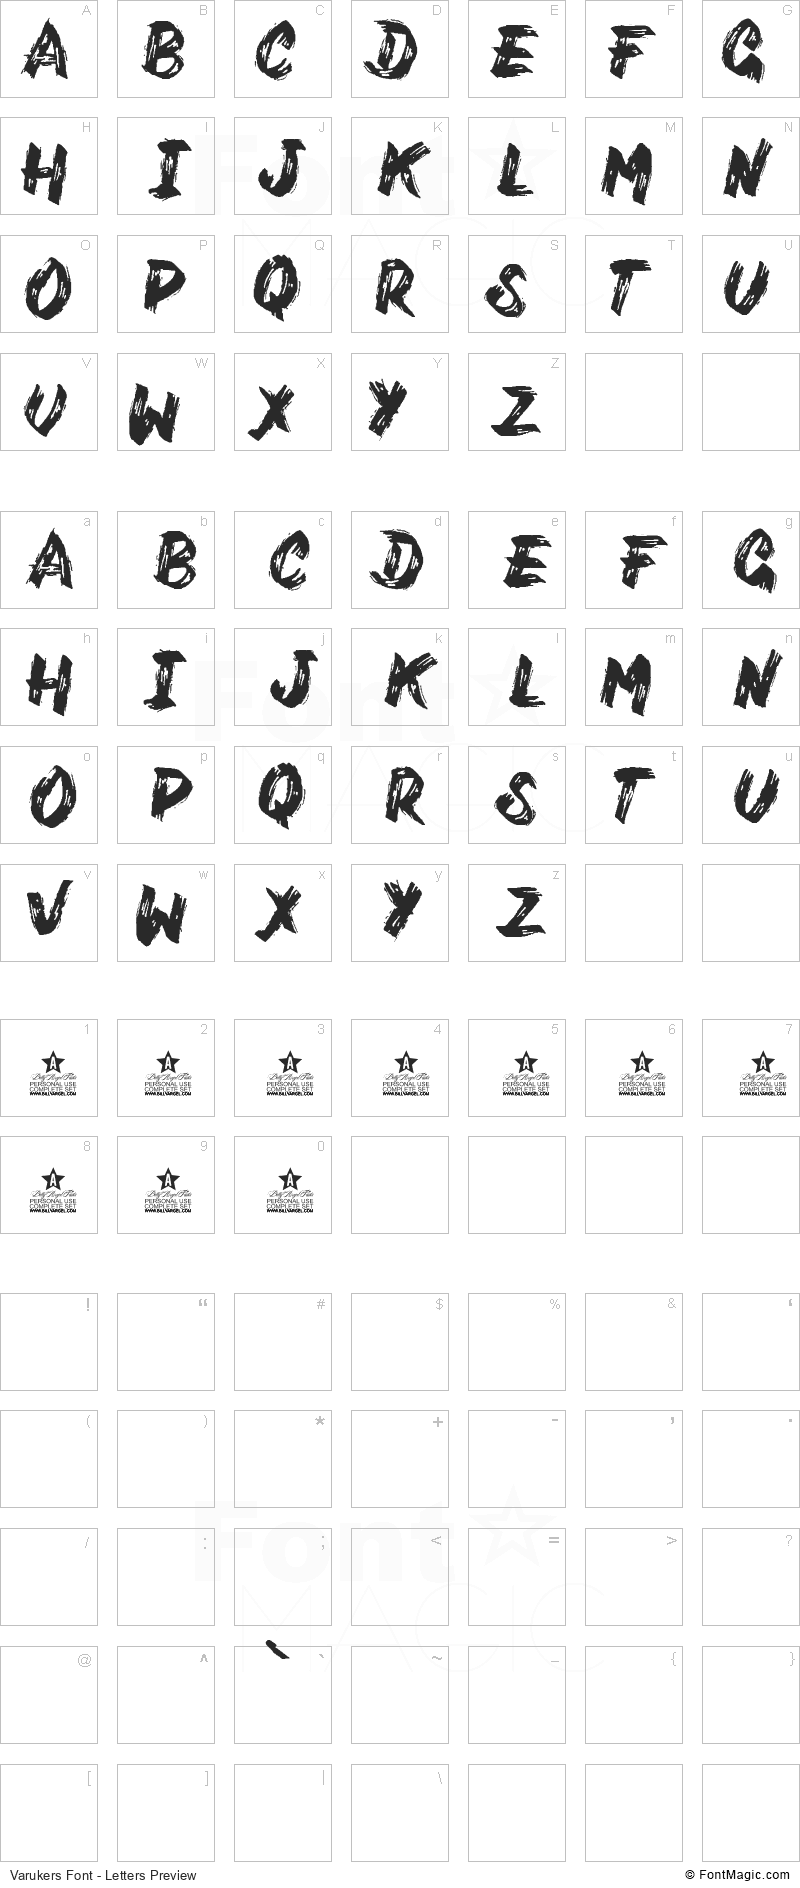 Varukers Font - All Latters Preview Chart